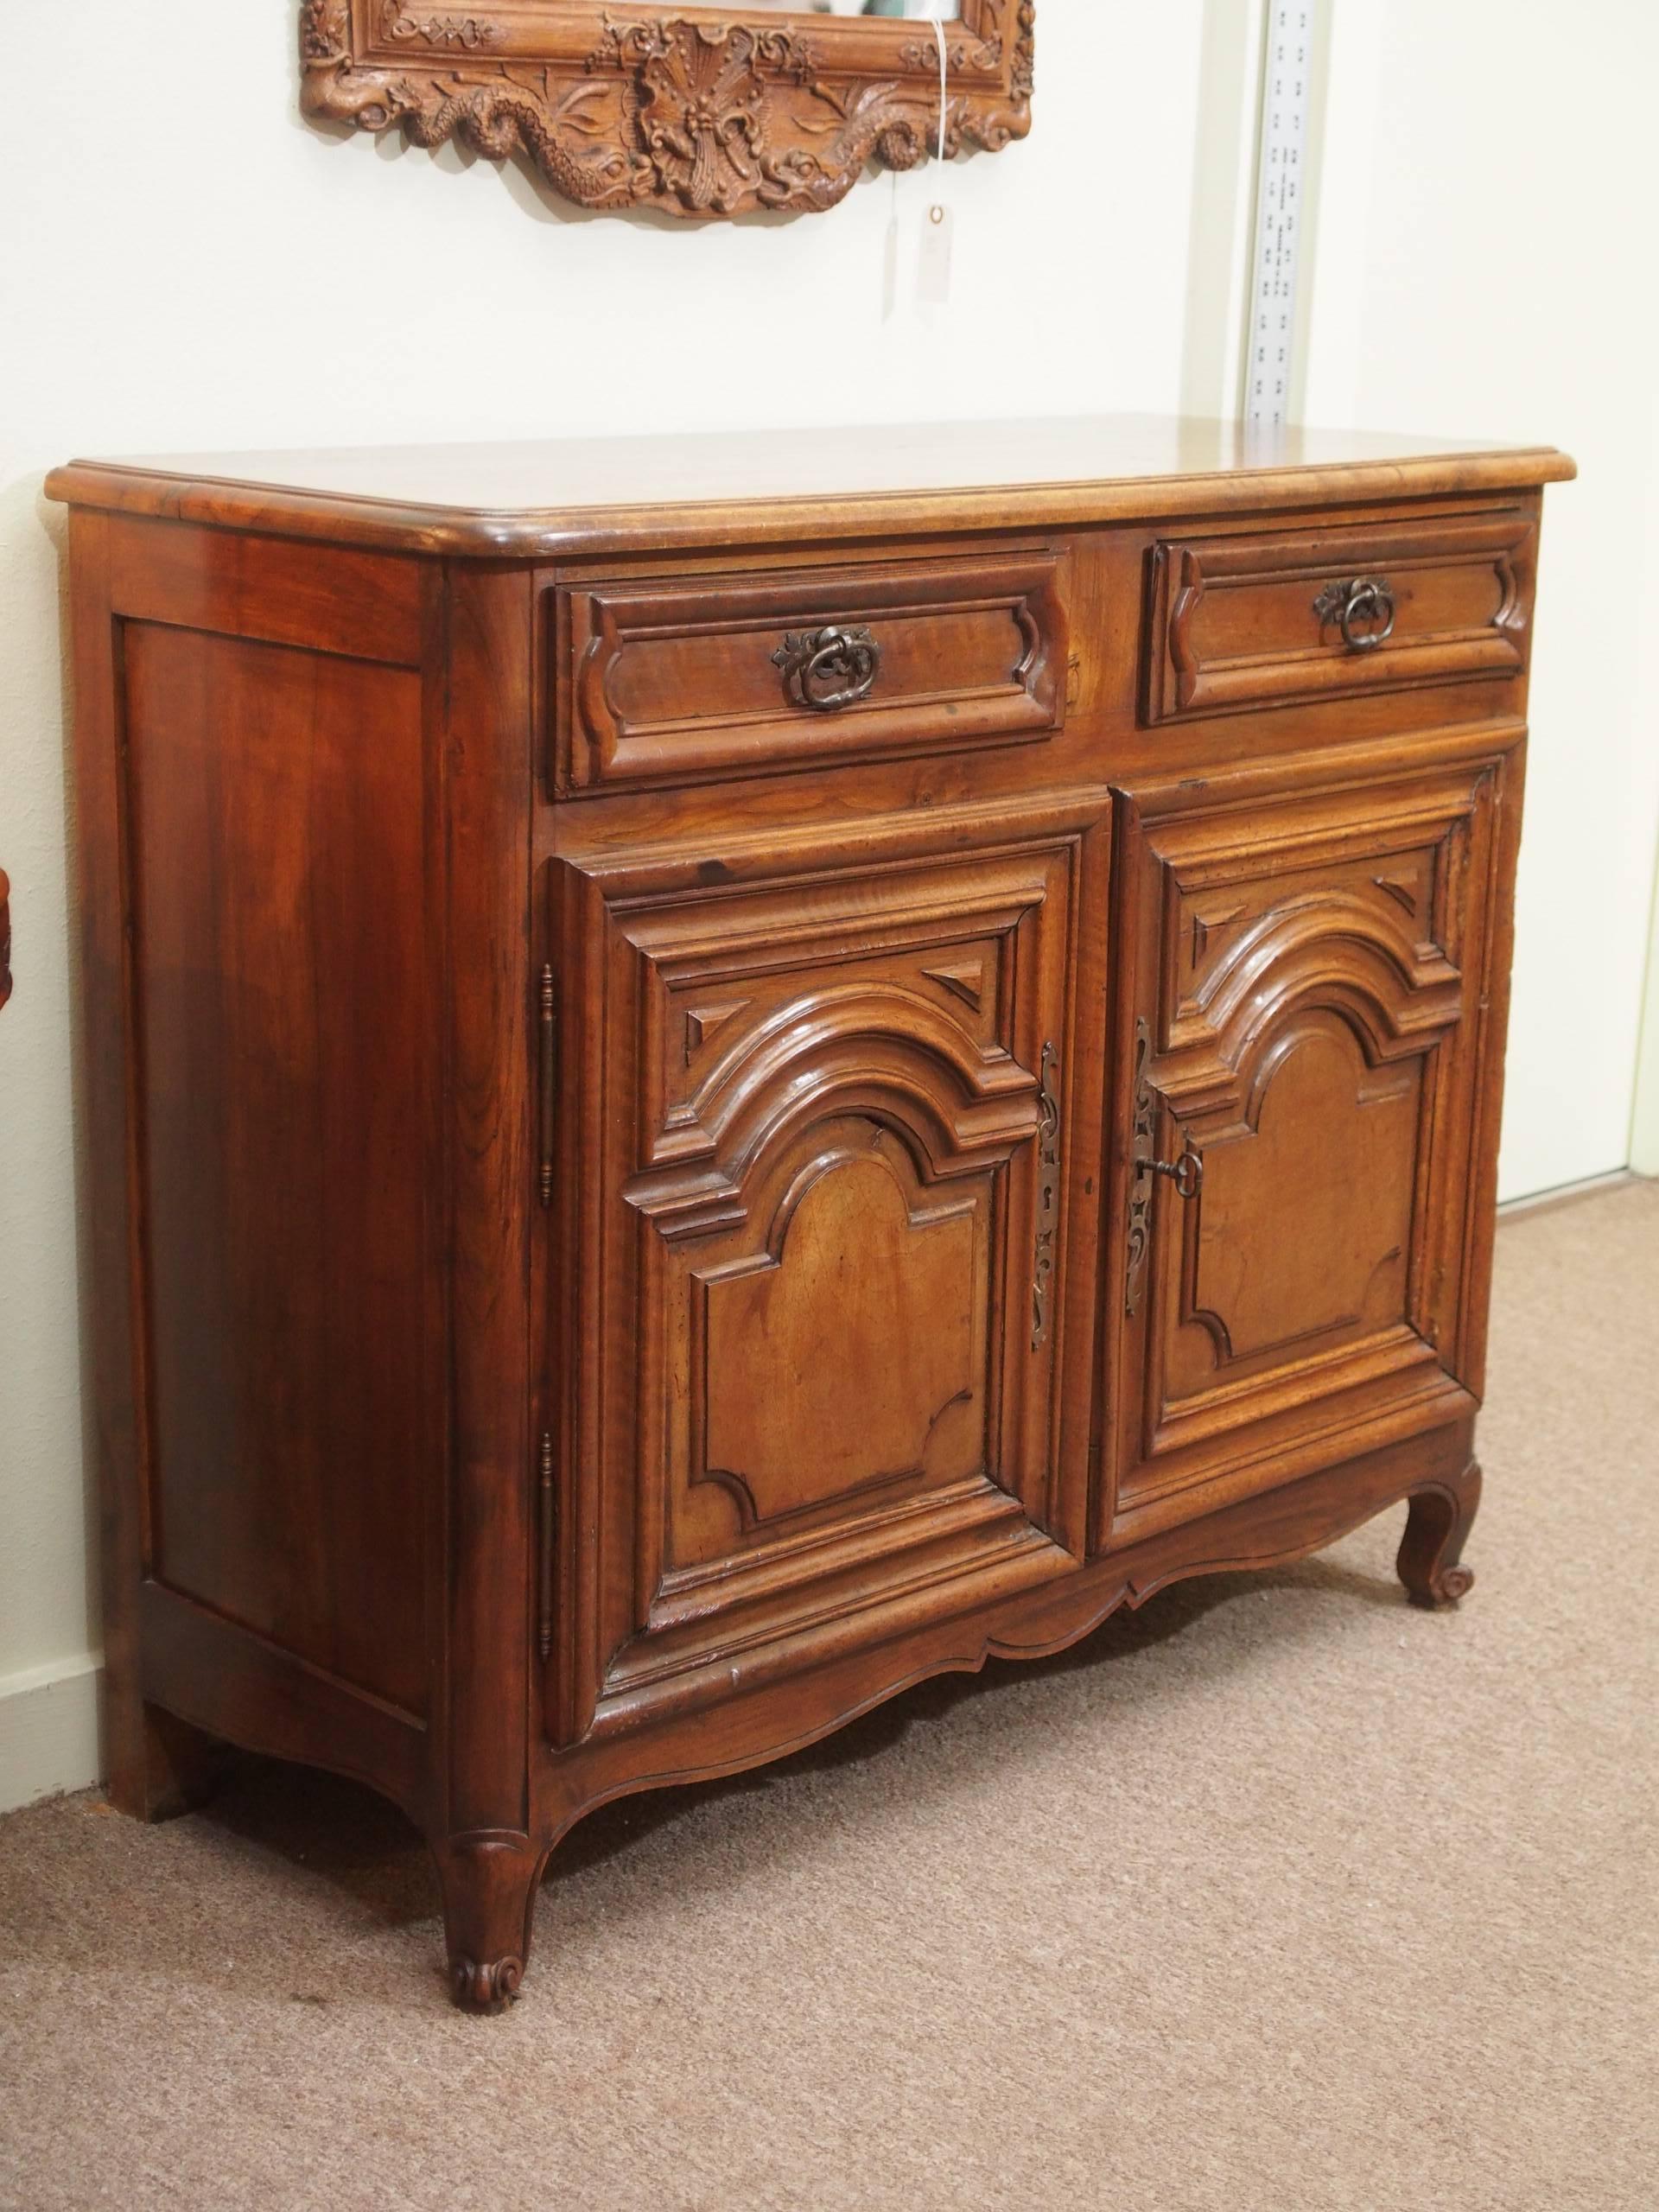 Antique French Provincial Small Walnut Cabinet In Good Condition For Sale In New Orleans, LA